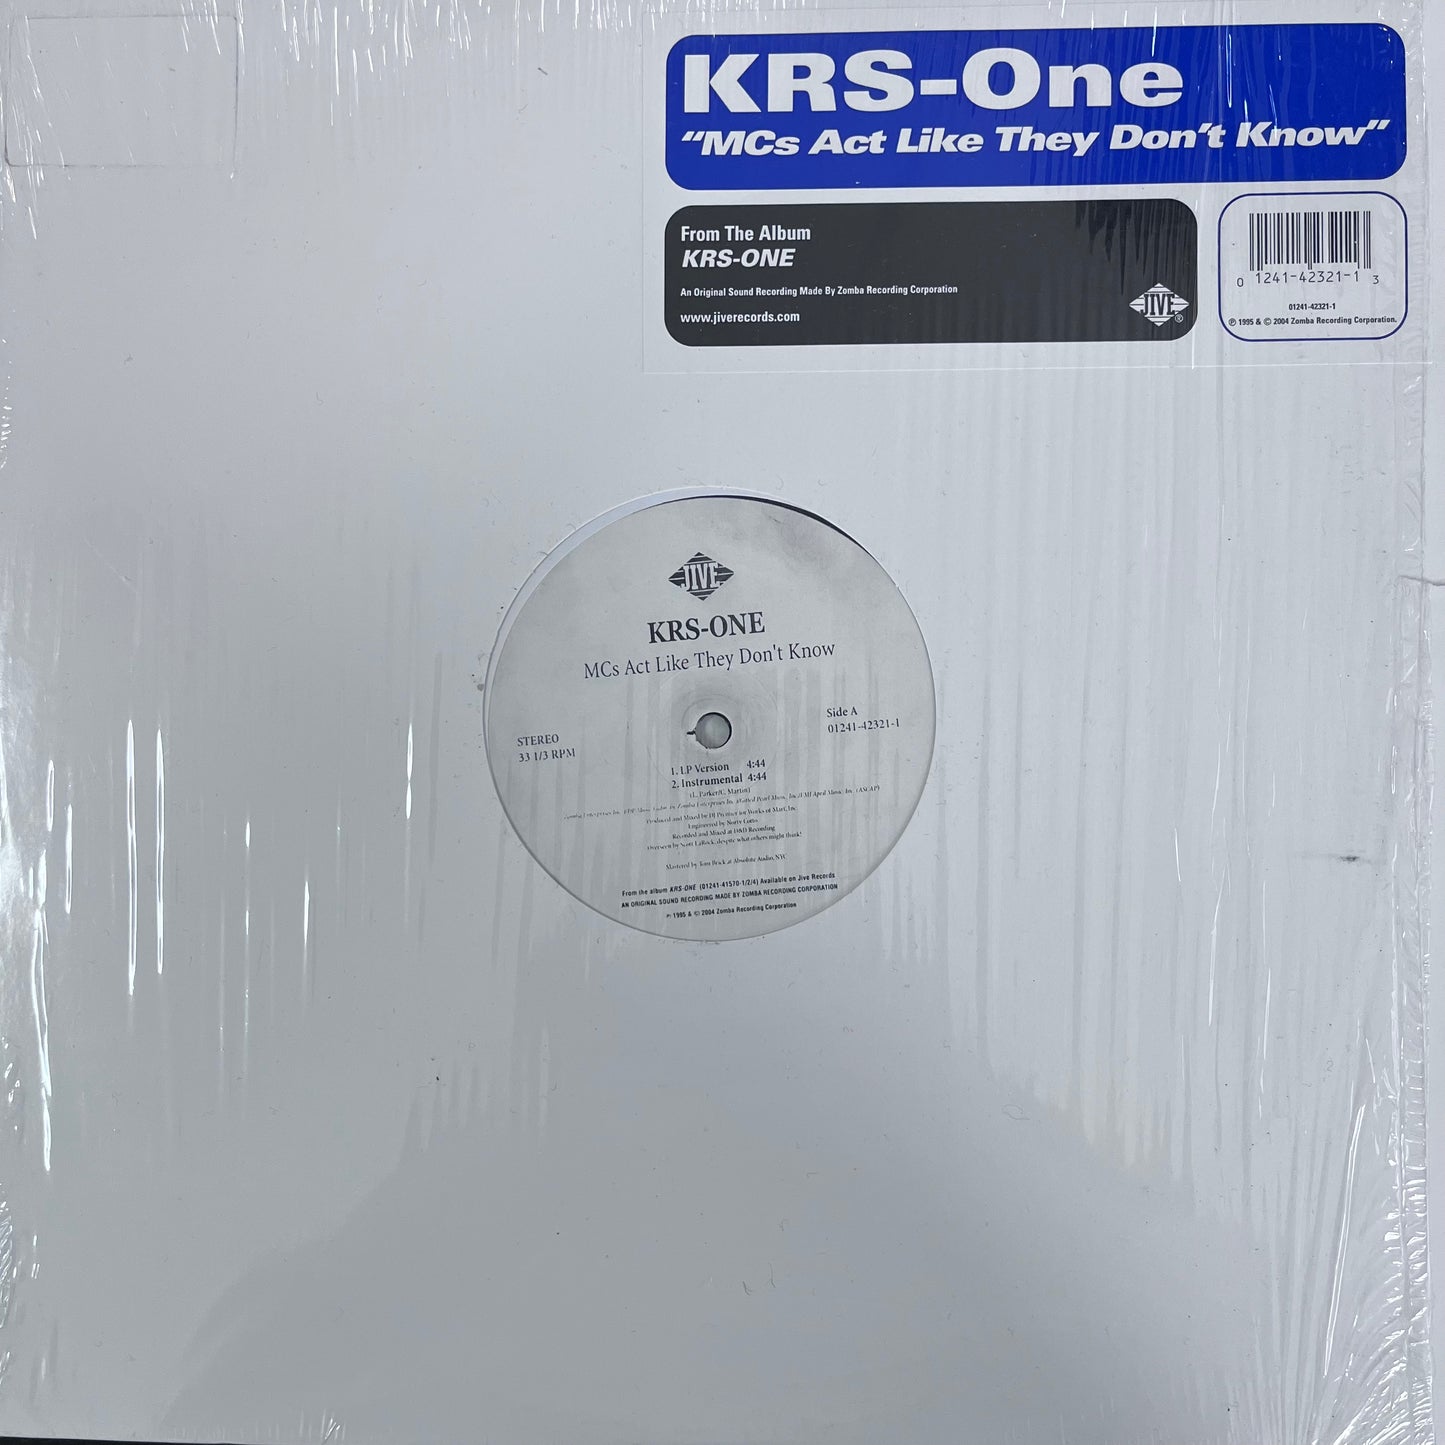 KRS-One “MCs Act Like They Don’t Know” 5 Version 12inch Vinyl Record on Jive Records